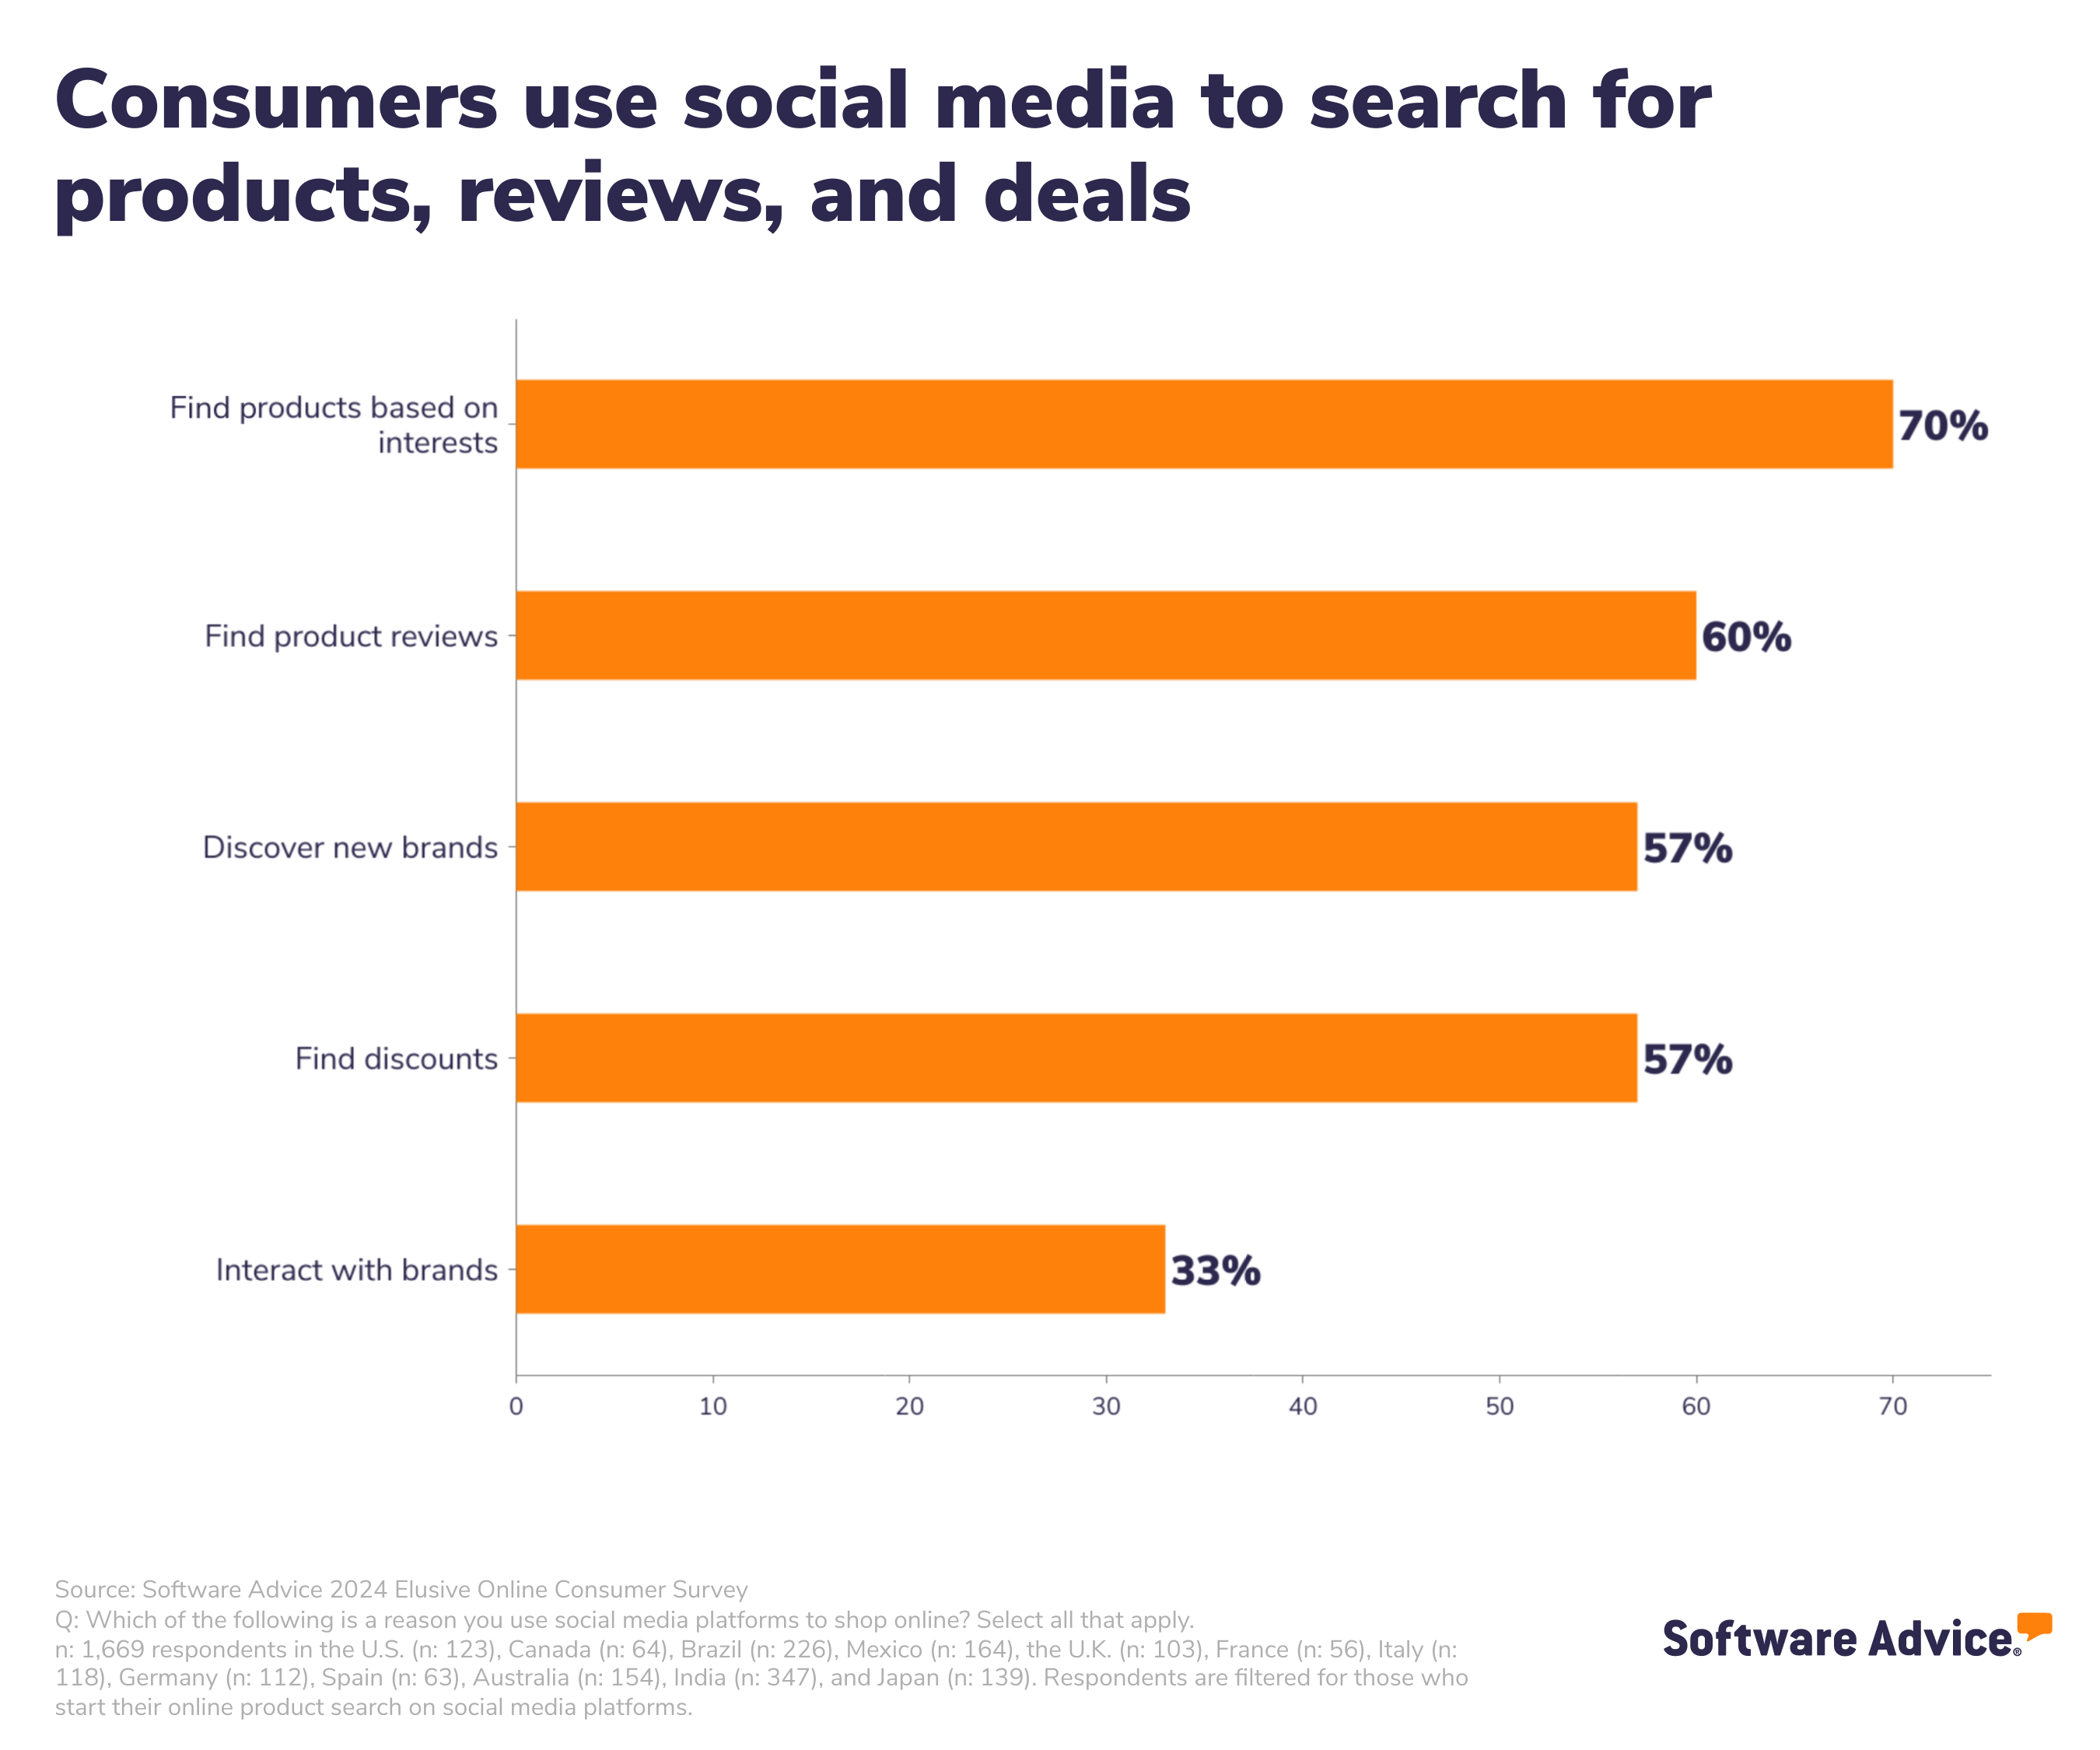 Bar chart showing how consumers use social media to shop online. 